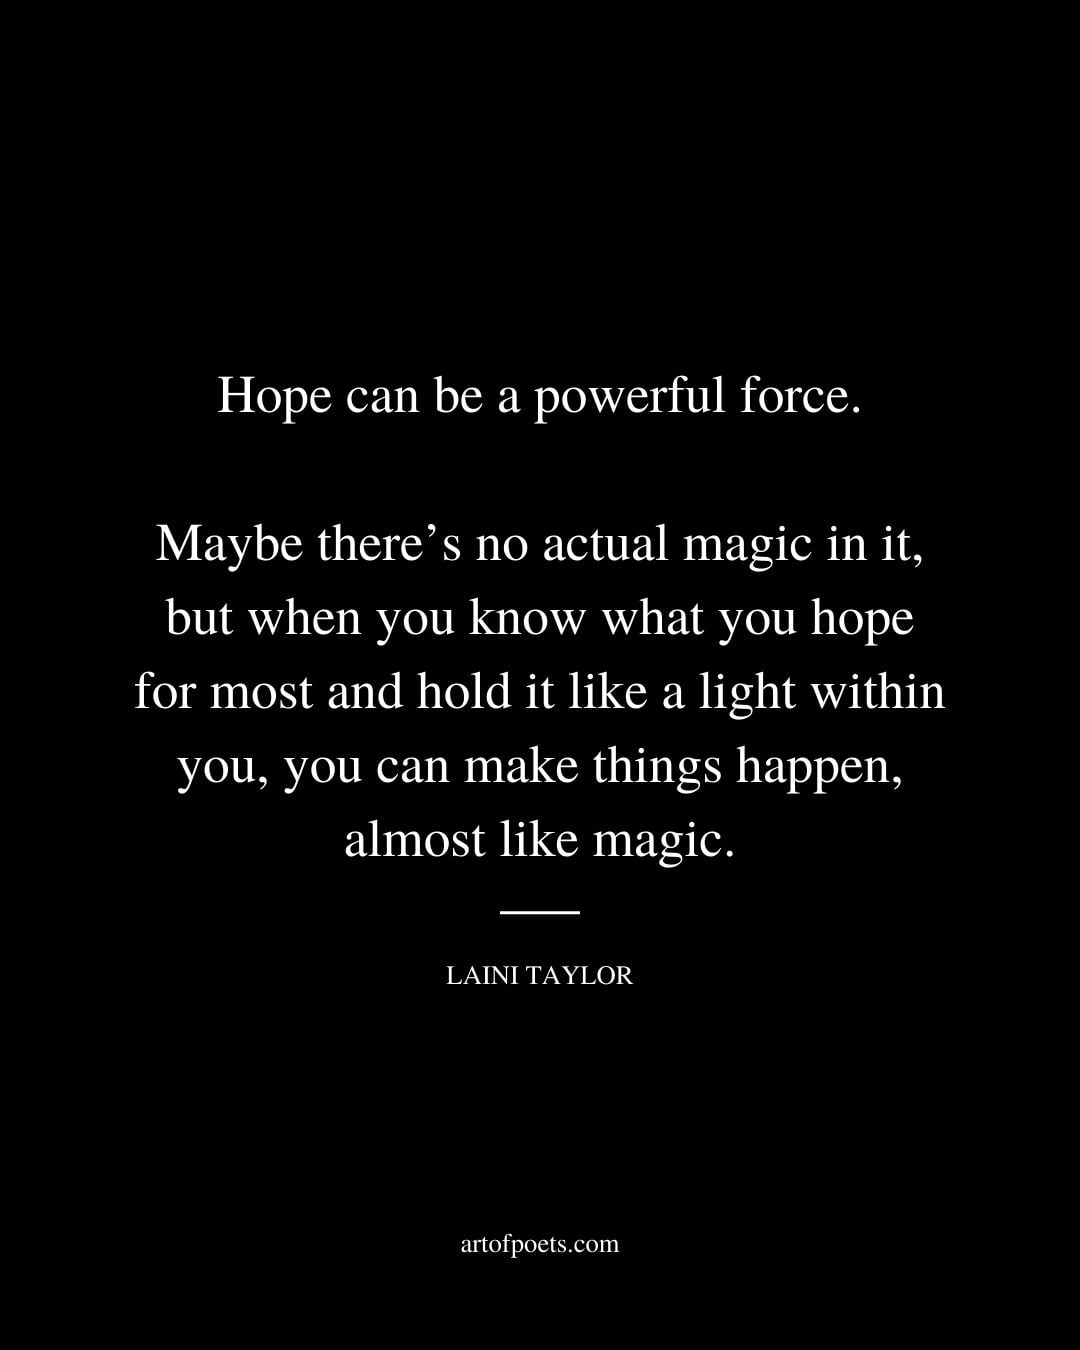 Hope can be a powerful force. Maybe theres no actual magic in it but when you know what you hope for most